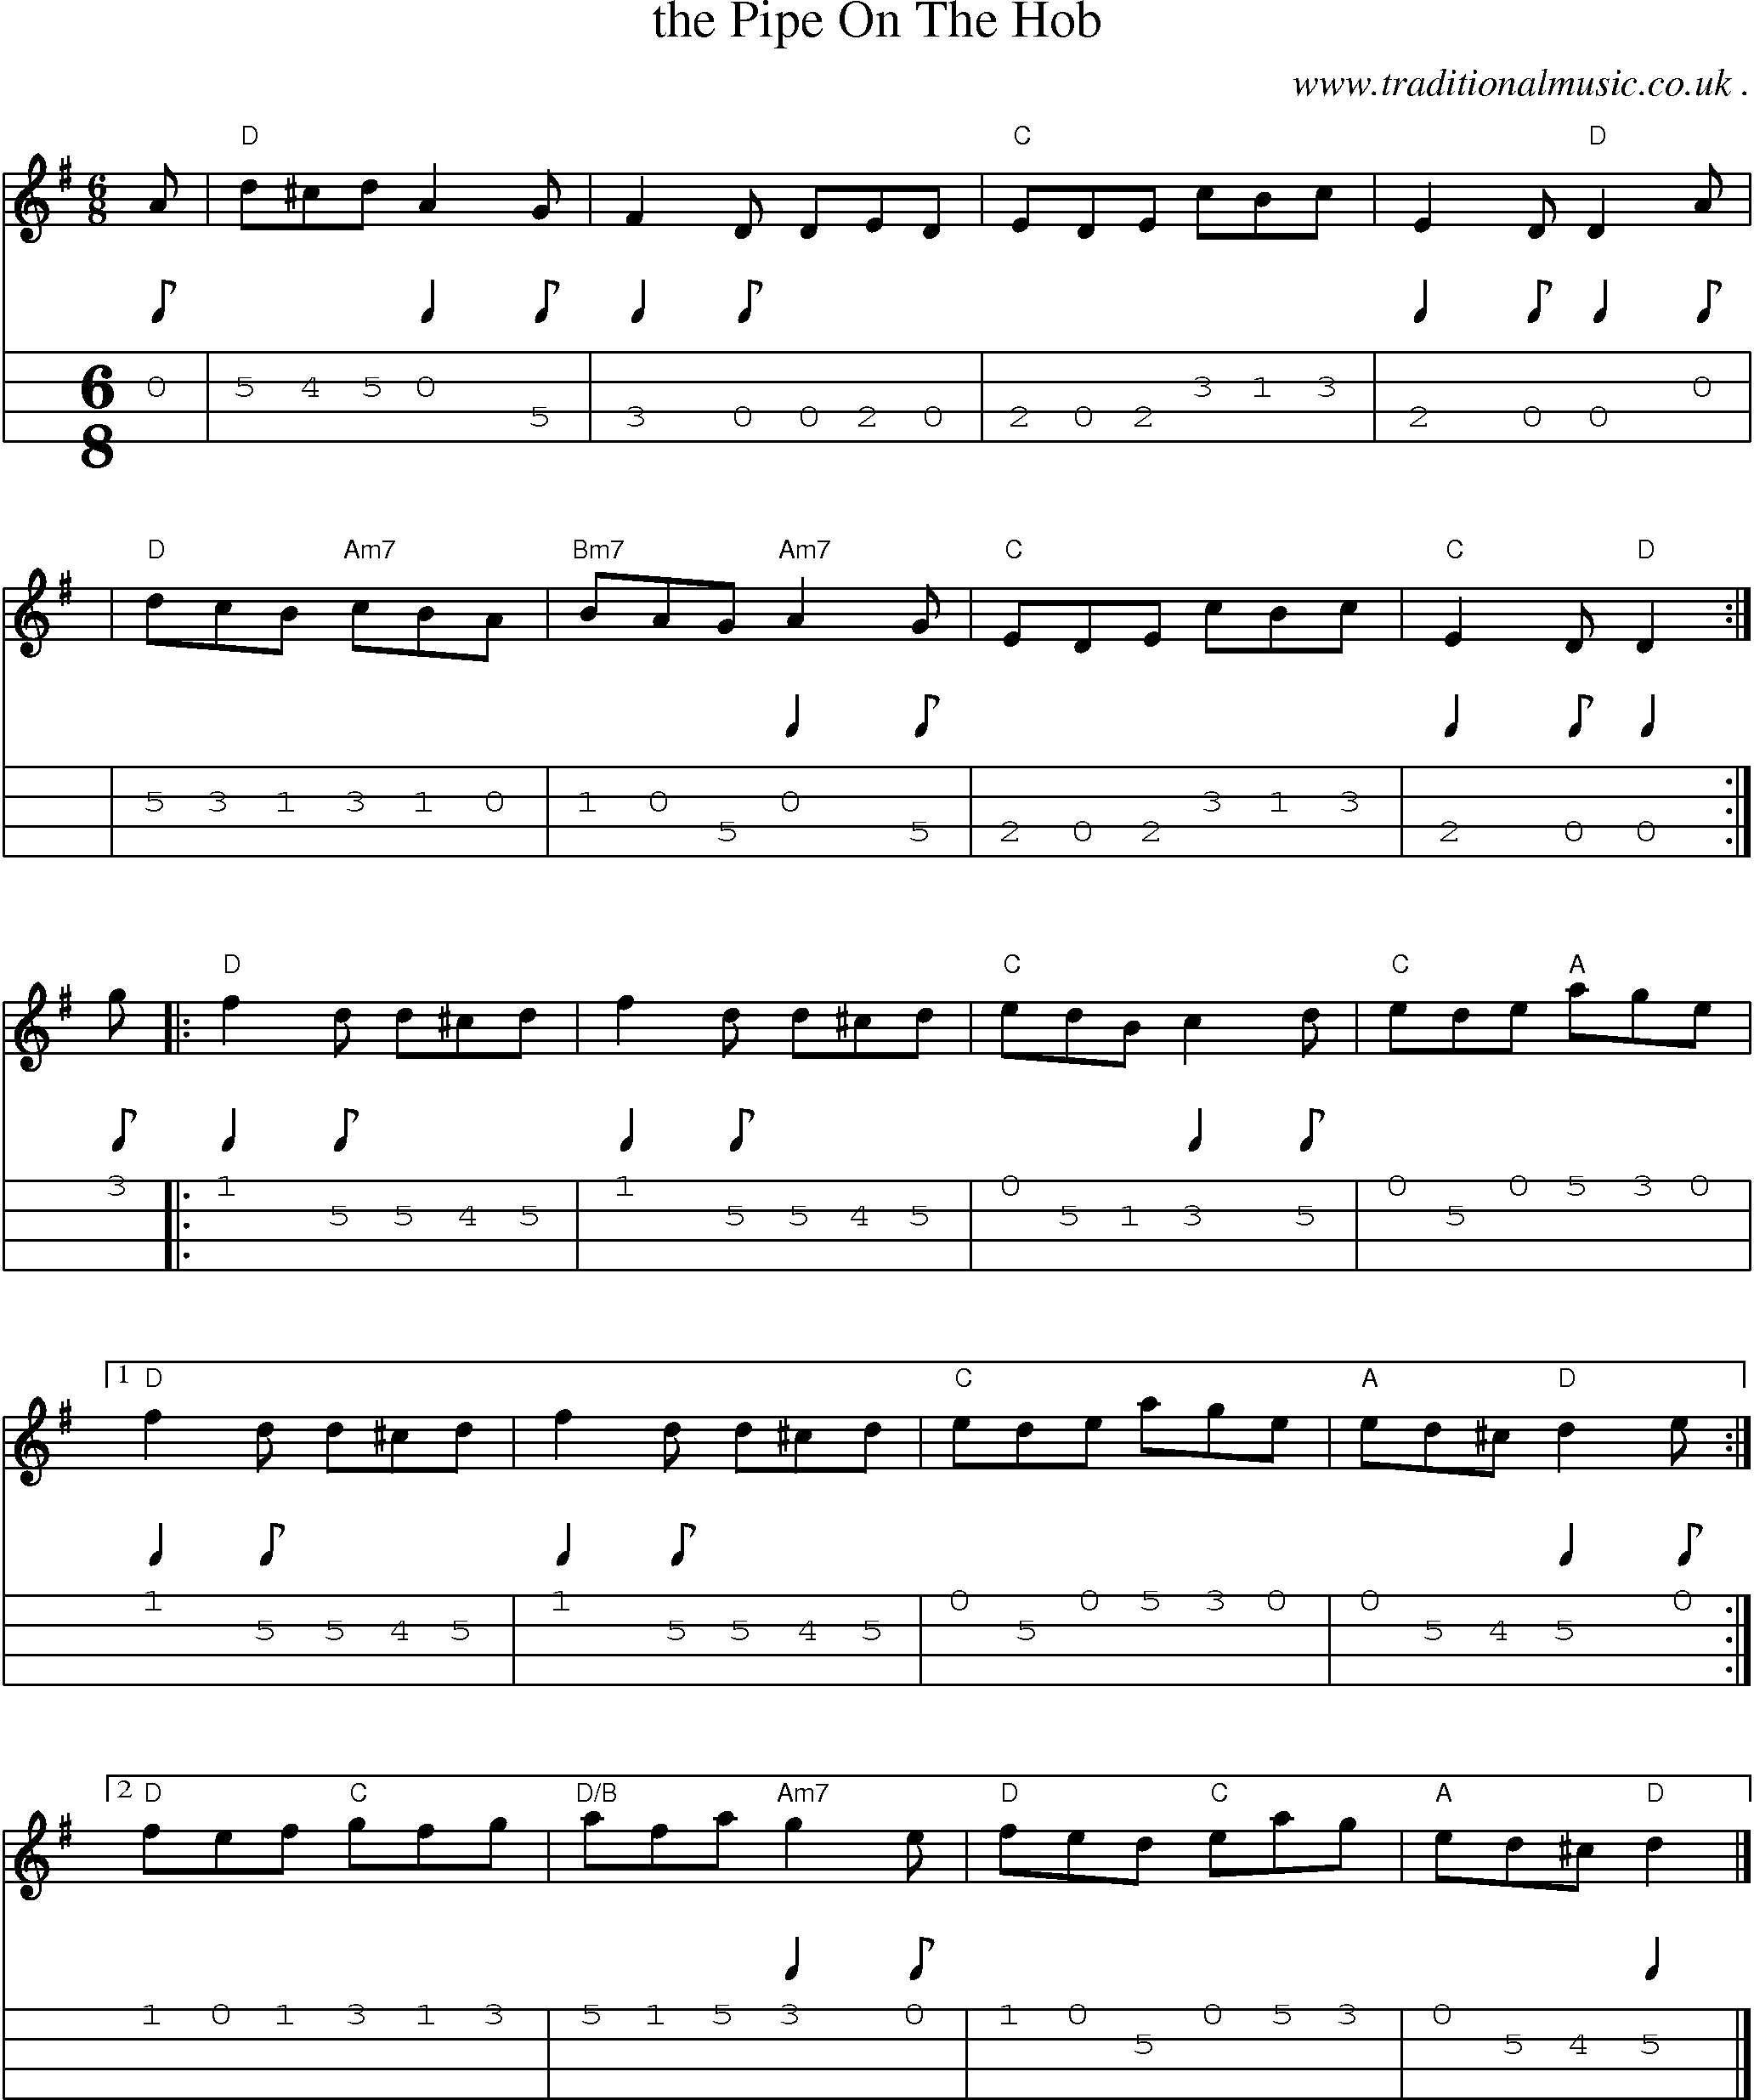 Sheet-music  score, Chords and Mandolin Tabs for The Pipe On The Hob